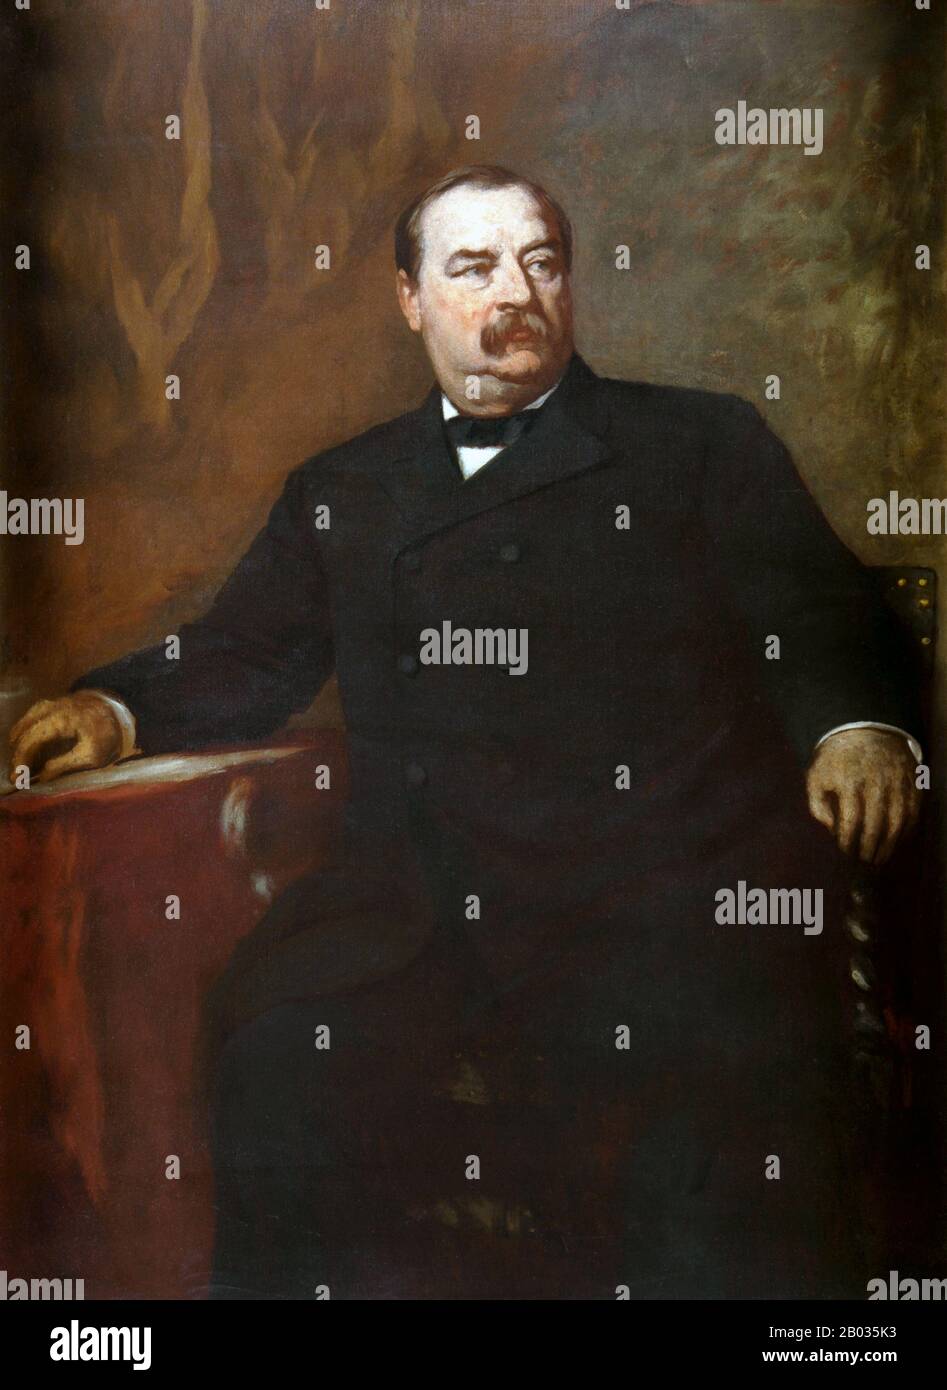 Stephen Grover Cleveland (March 18, 1837 – June 24, 1908) was an American politician and lawyer who served as the 22nd and 24th President of the United States. He won the popular vote for three presidential elections – in 1884, 1888, and 1892 – and was one of the three Democrats (with Andrew Johnson and Woodrow Wilson) to serve as president during the era of Republican political domination dating from 1861 to 1933.  He was also the first and only President in American history to serve two non-consecutive terms in office. Stock Photo